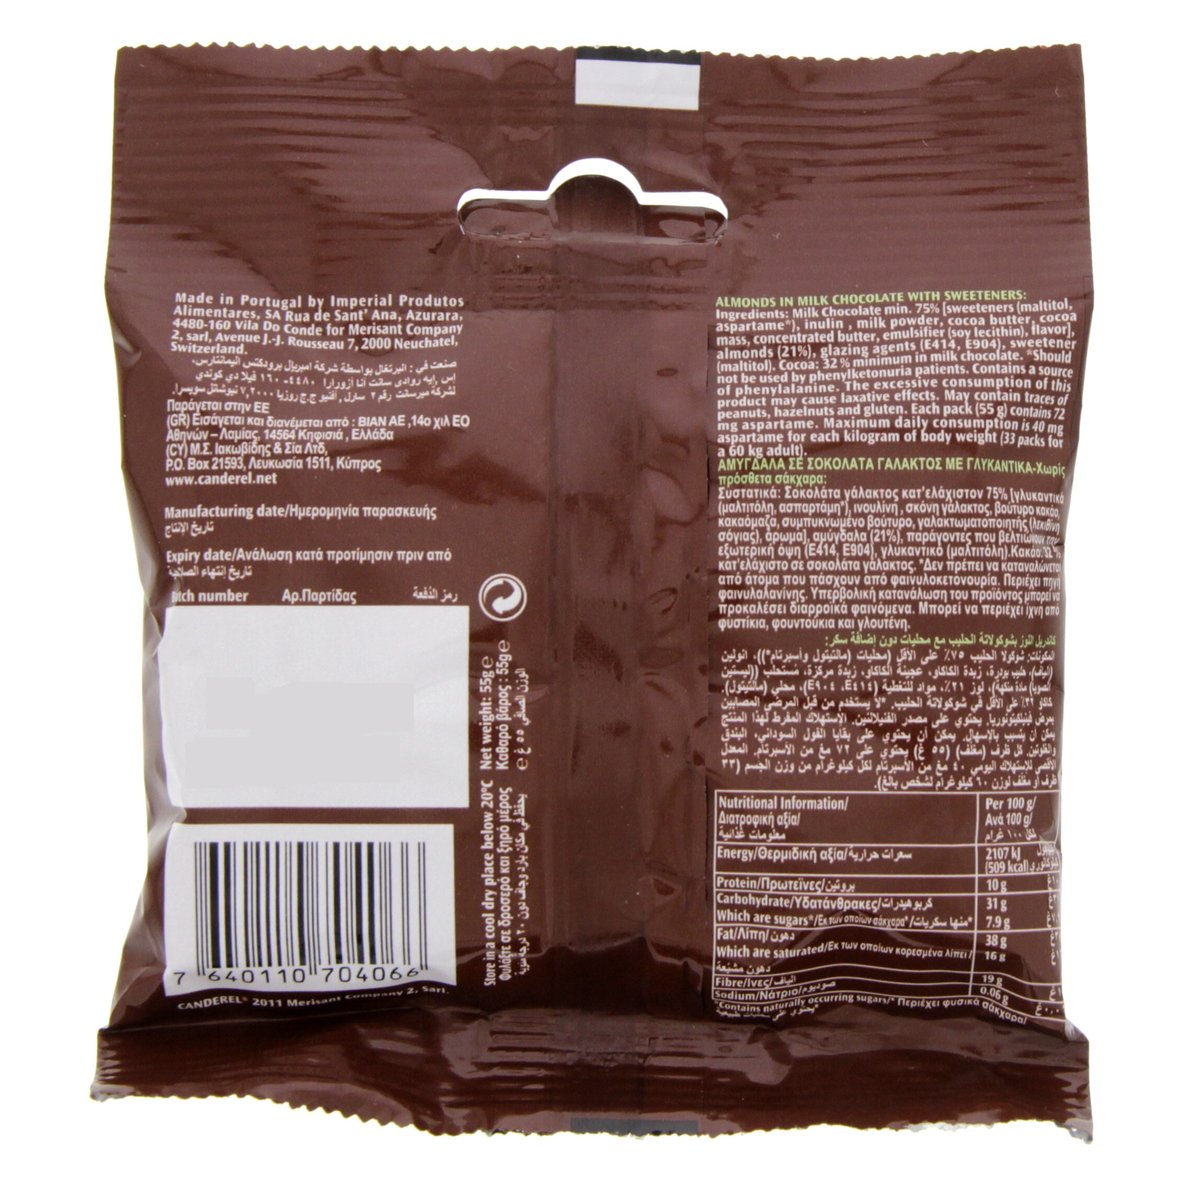 Canderel Almonds In Milk Chocolate With Sweeteners 55 g